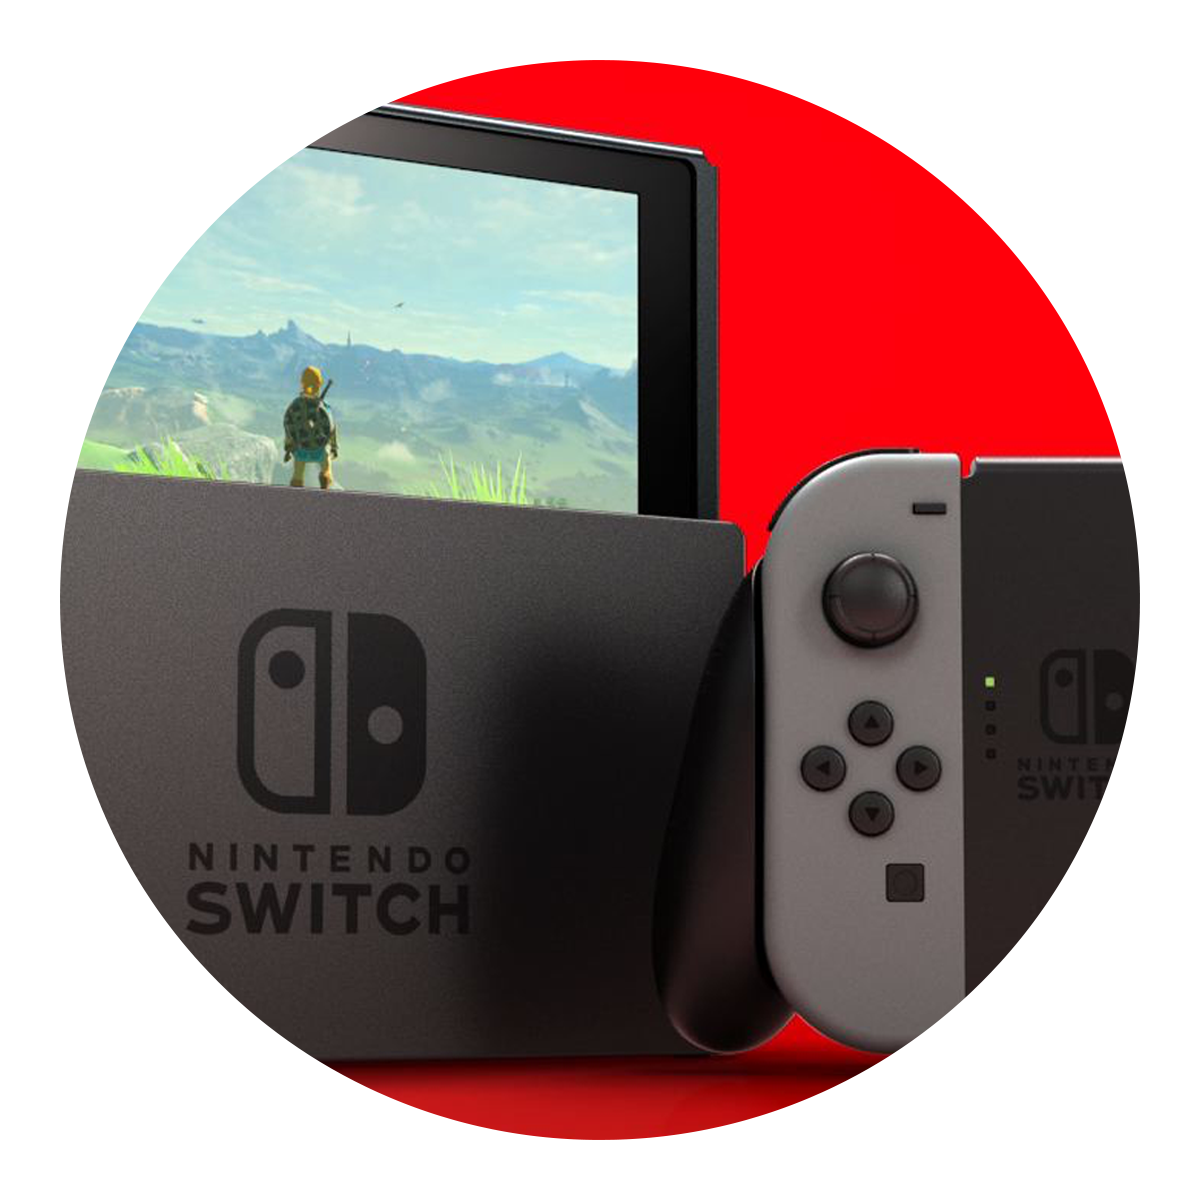 Genki: The Must Have Accessories for Nintendo Switch | by Kristina M. H. |  SUPERJUMP | Medium